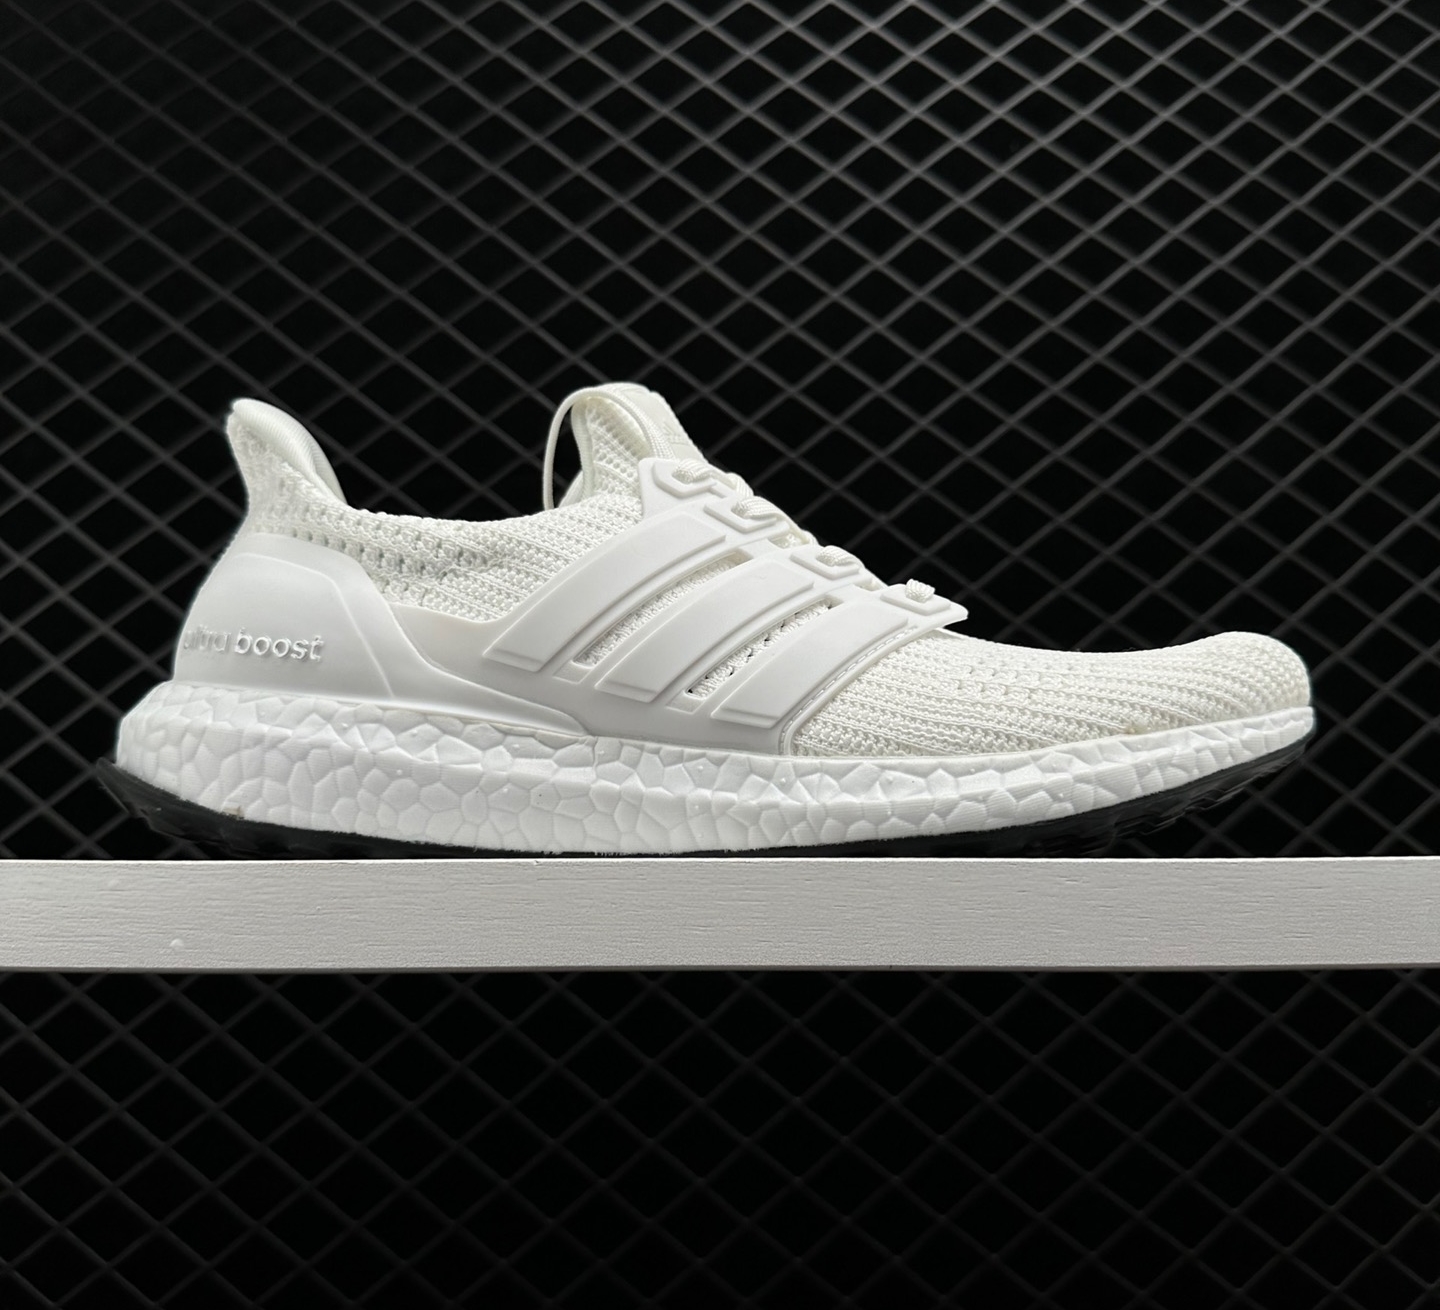 Adidas UltraBoost 4.0 DNA 'Cloud White' FY9120 - Stylish and Comfortable Sneakers